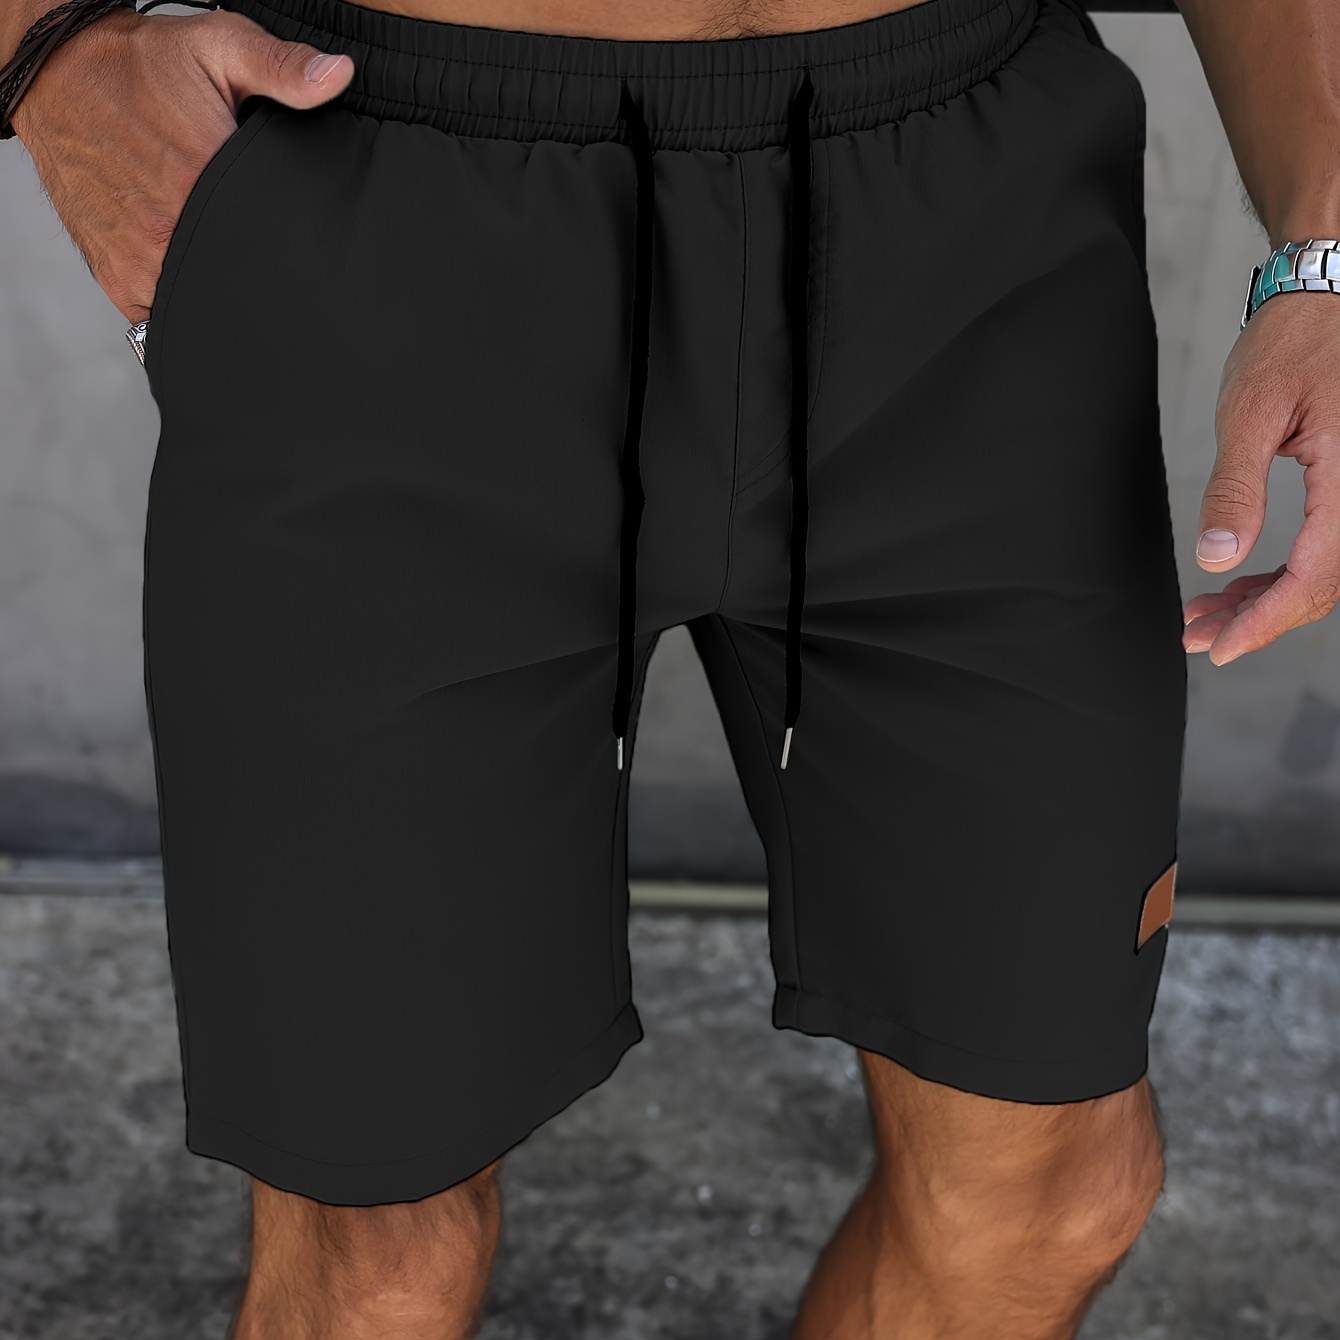 

Men's Casual And Chic Solid Color Shorts With Drawstring, Pockets And Leather Label Patchwork Pieces, Comfy And Breathable Shorts For Summer Outdoors Wear